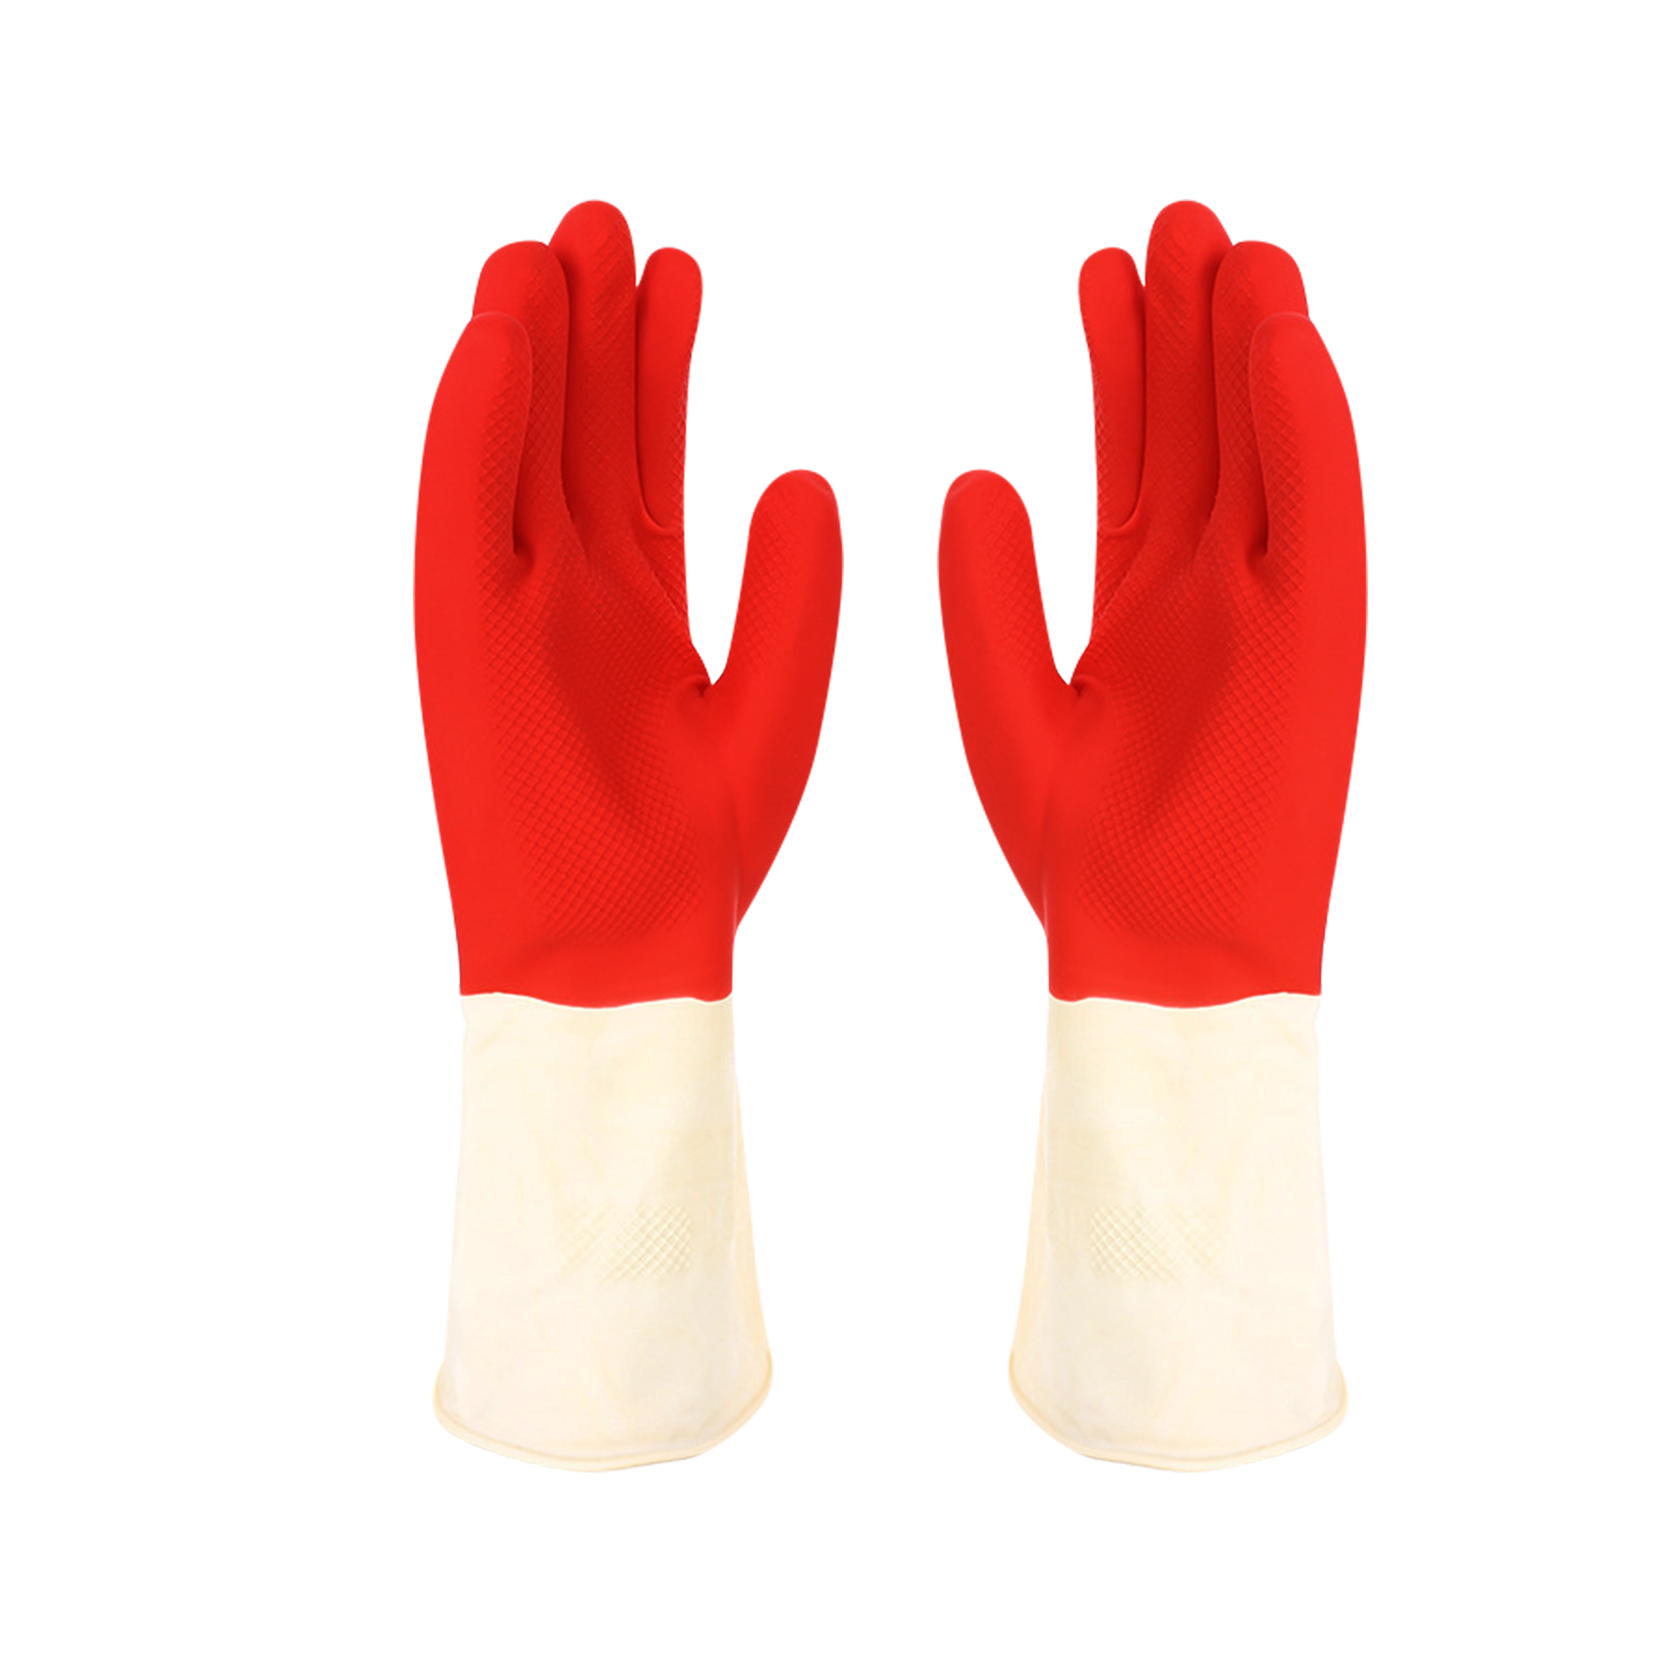 Red and white double color industrial latex gloves working (1)